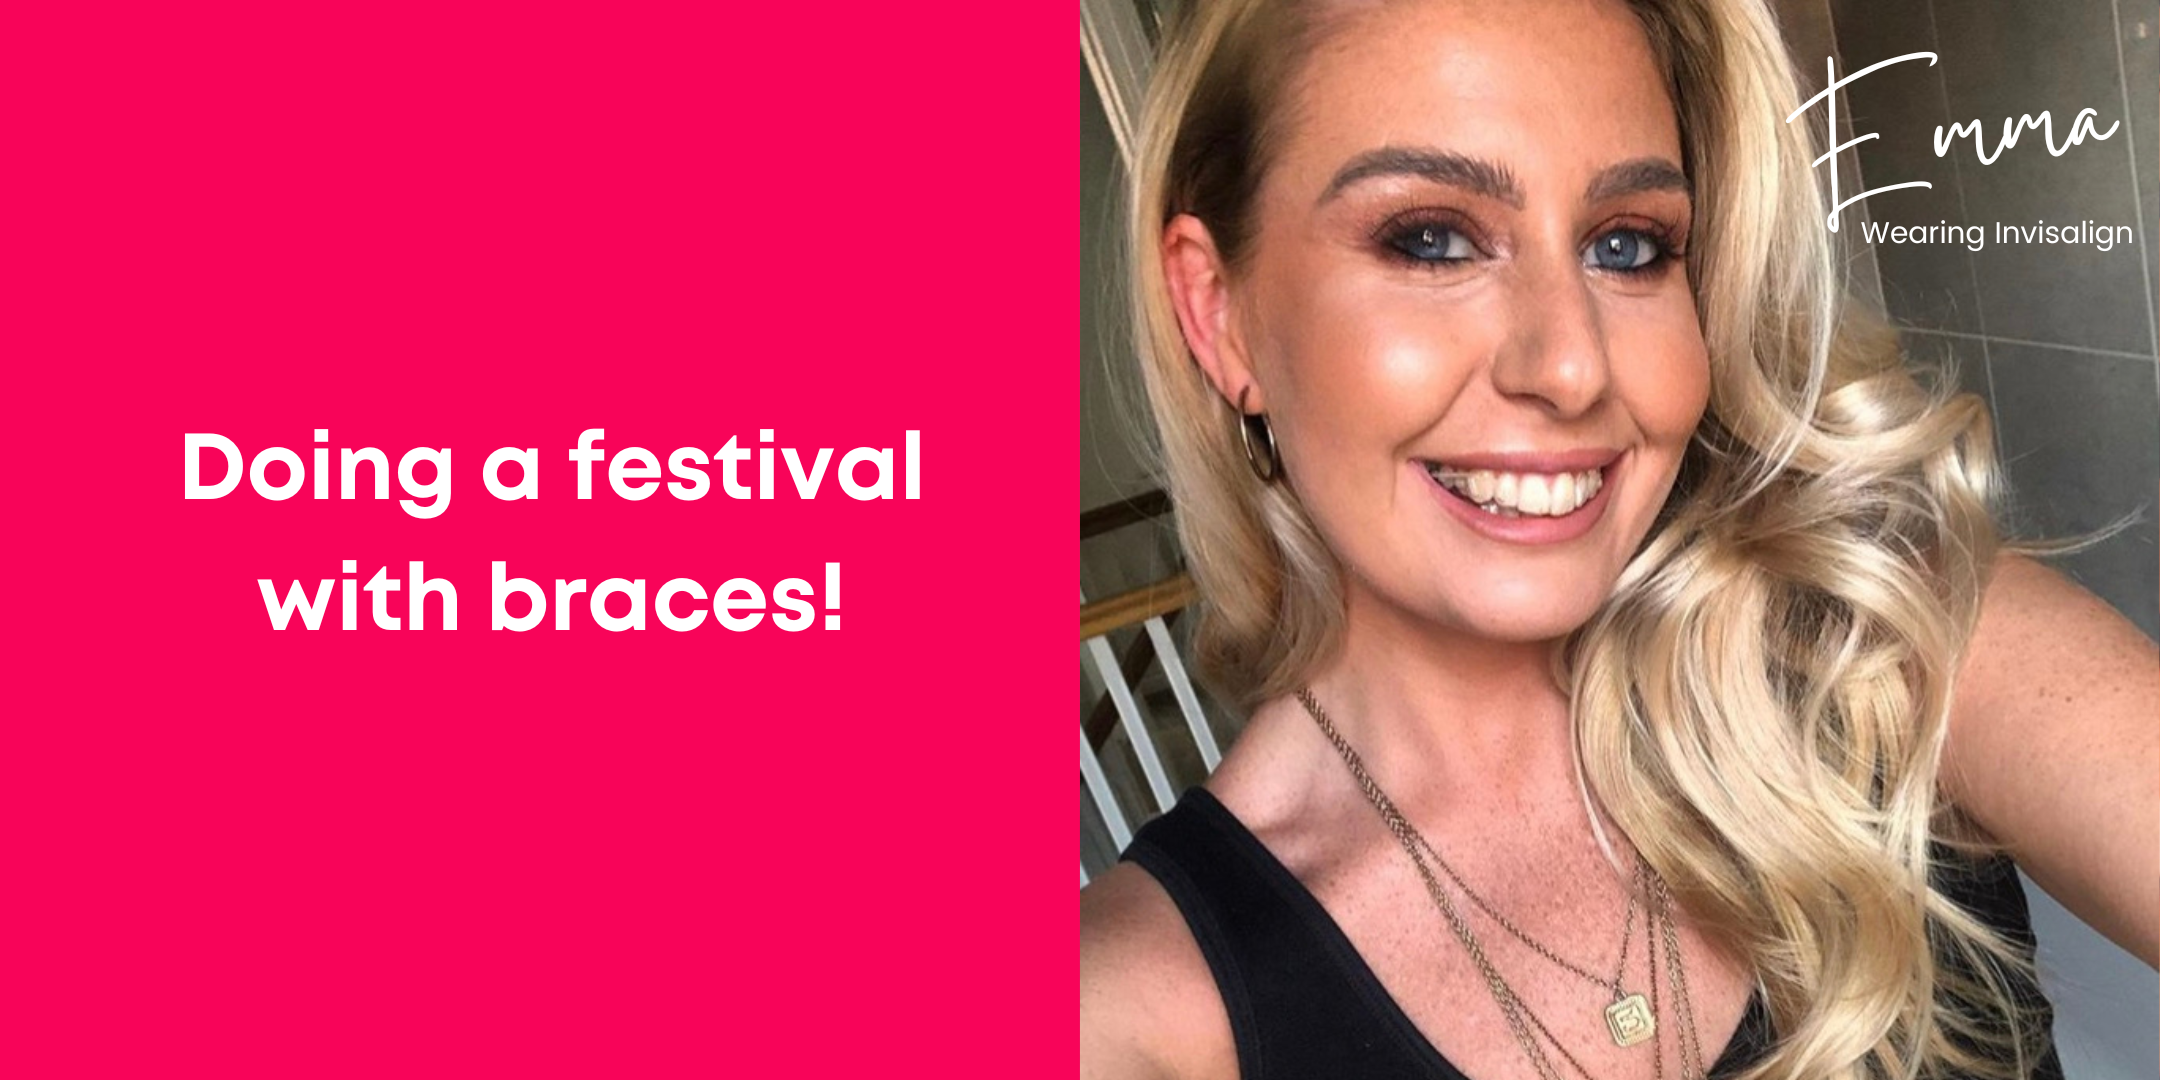 Doing a festival with braces